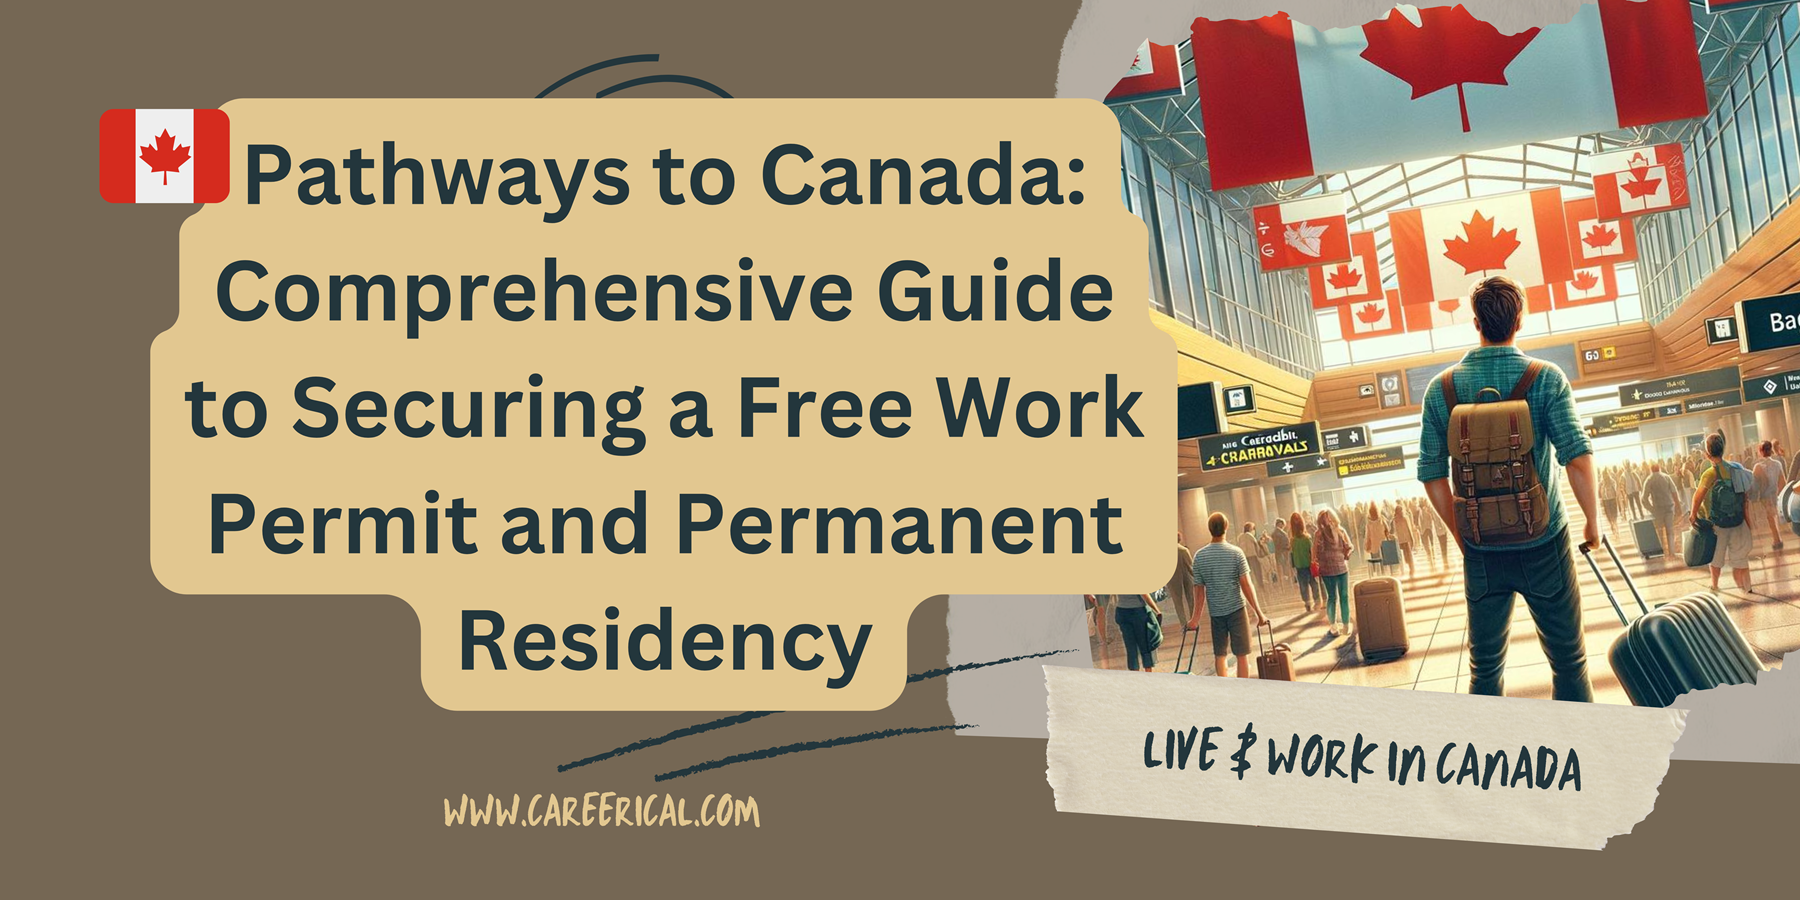 Pathways to Canada Comprehensive Guide to Securing a Free Work Permit and Permanent Residency